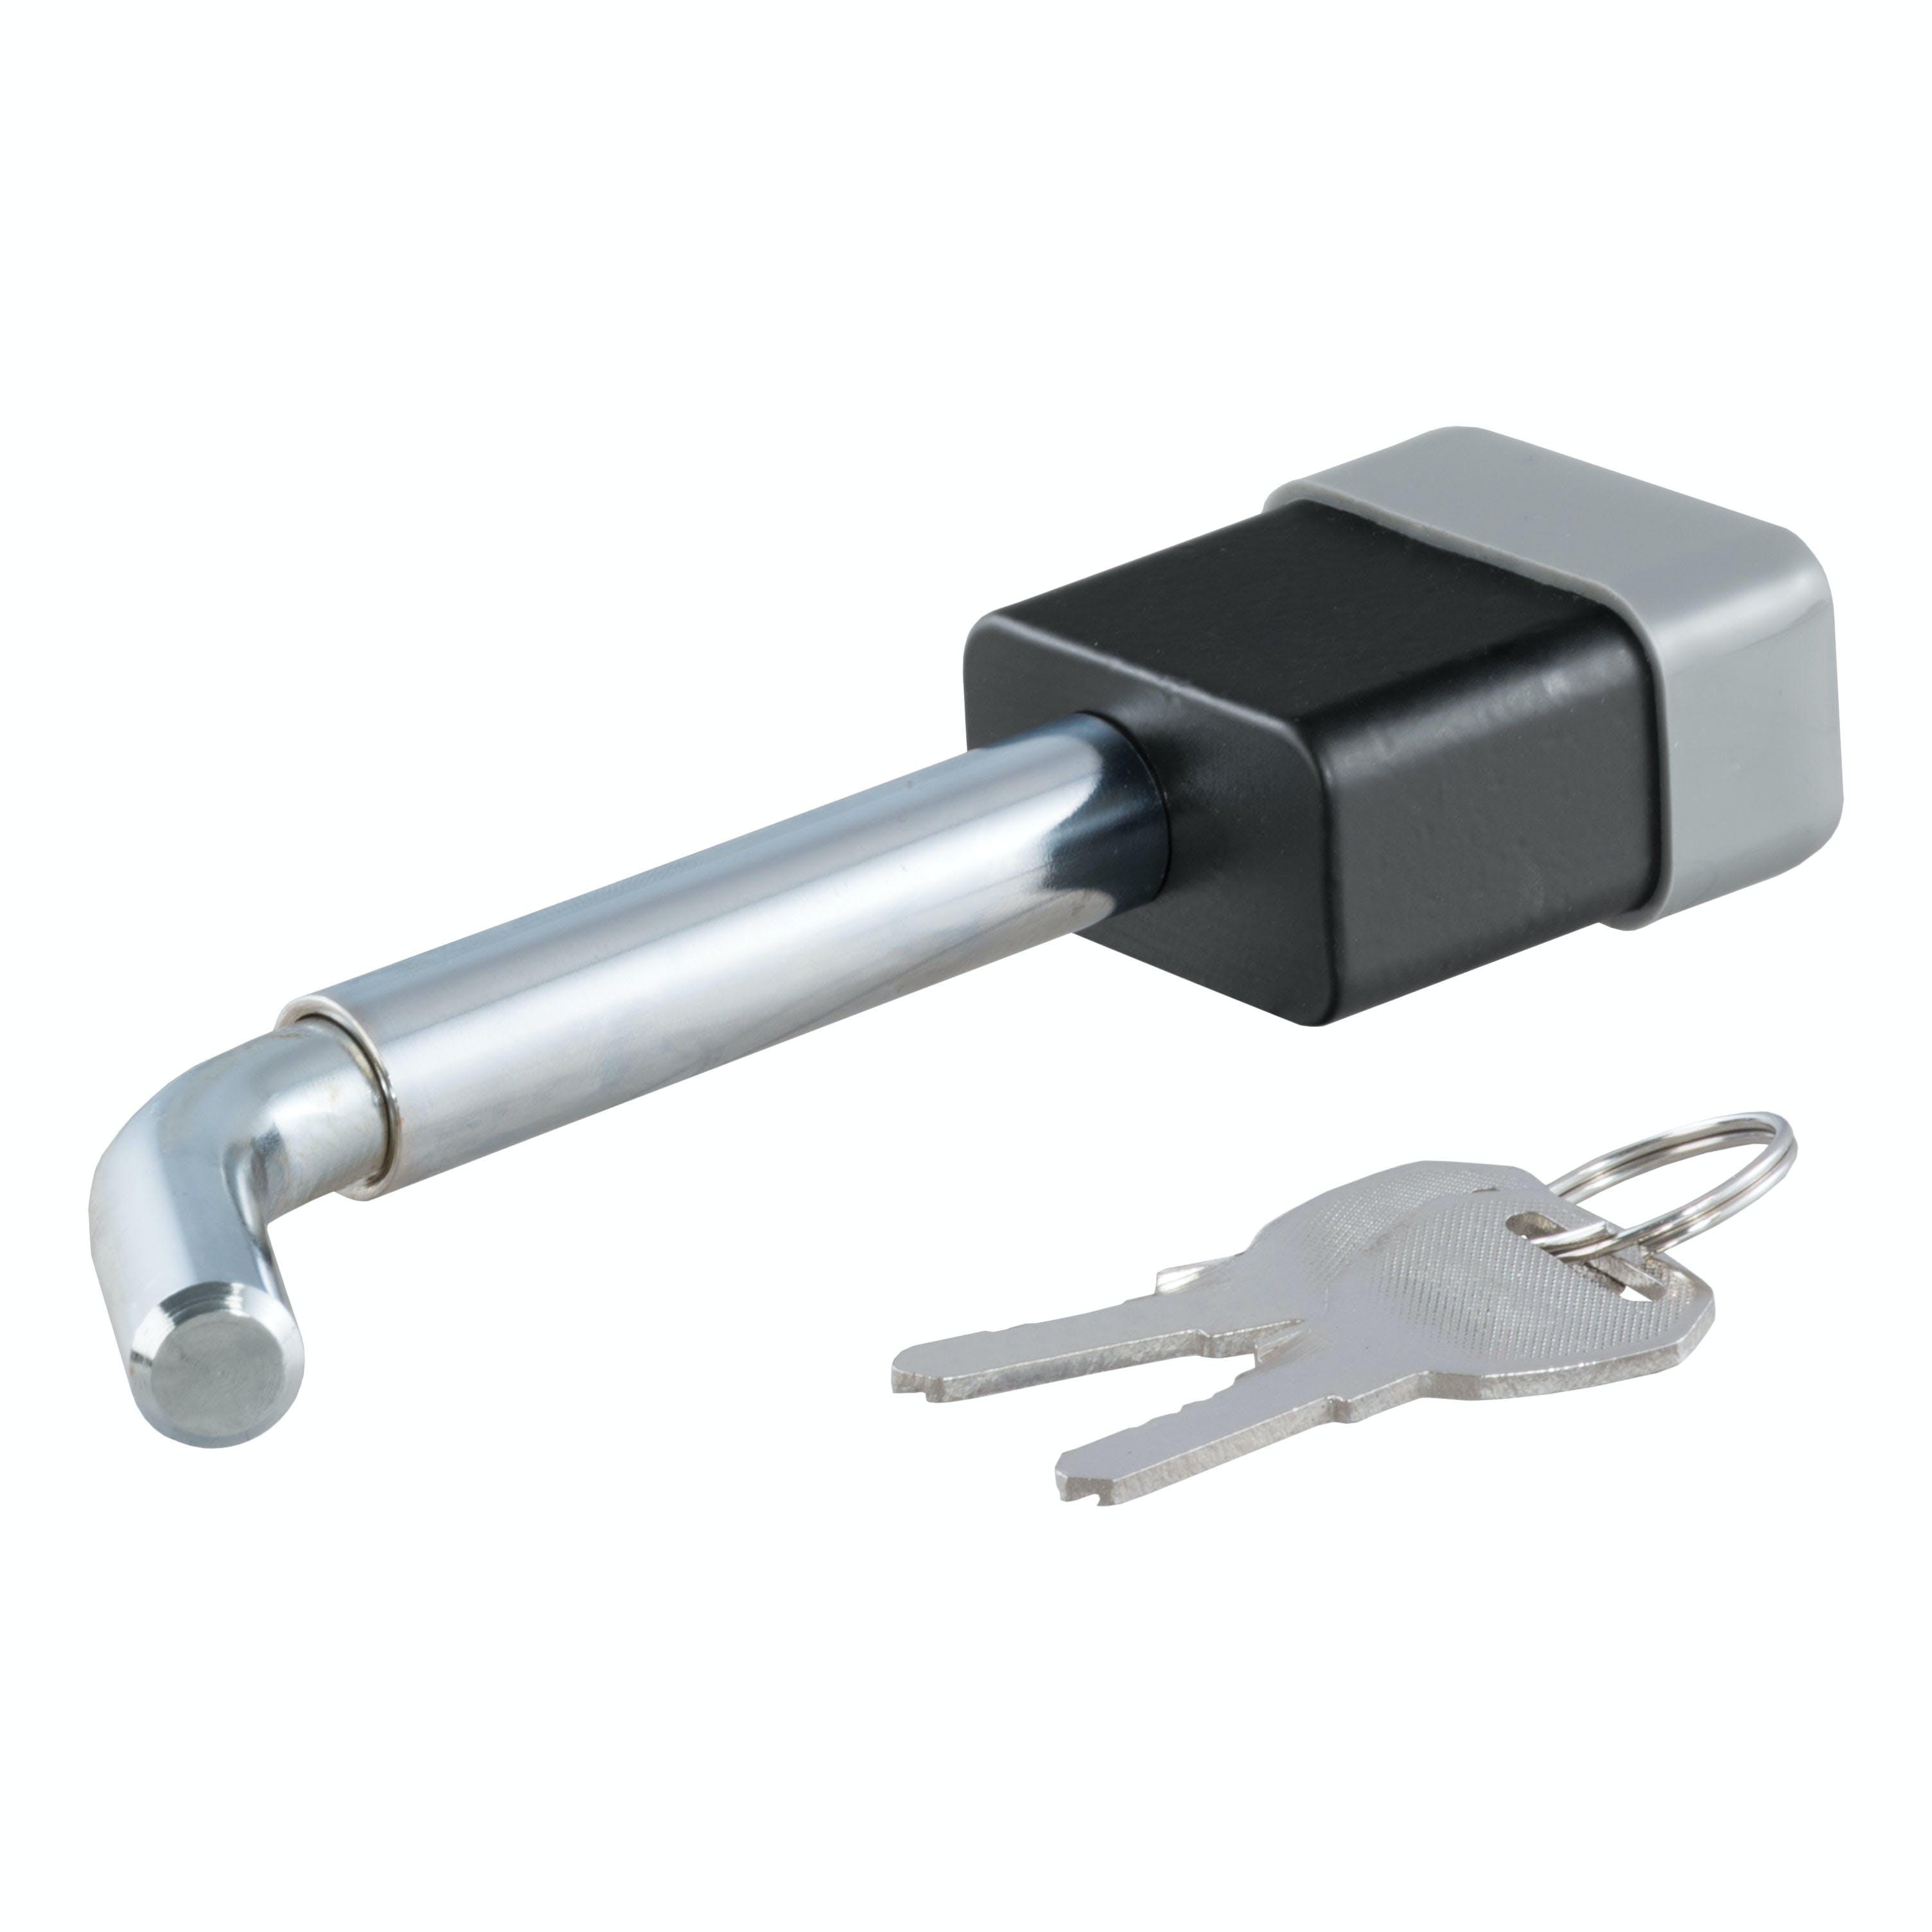 CURT 23024 1/2 Hitch Lock with 5/8 Adapter (1-1/4 or 2 Receiver, Deadbolt, Chrome)